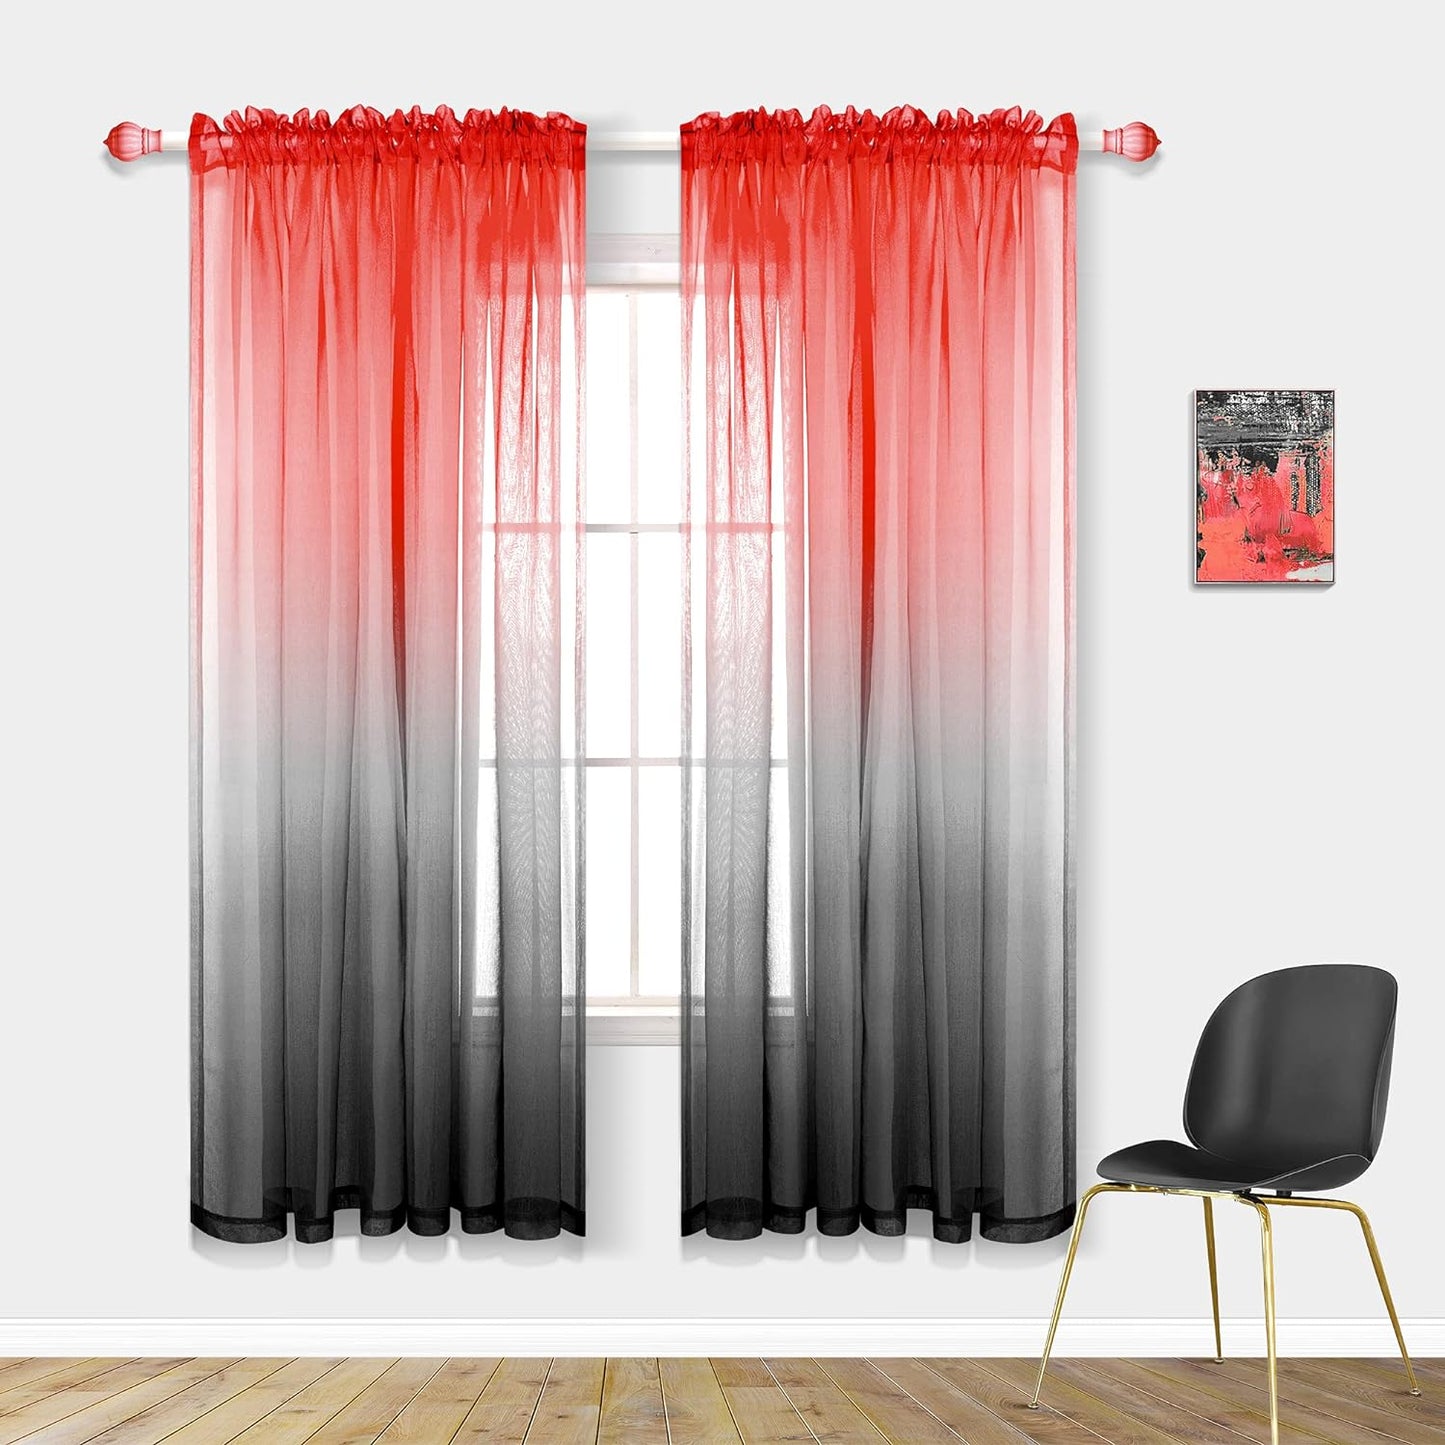 Spring Sheer Curtains for Living Room with Rod Pocket Window Treatments Decor 84 Inch Length Bedroom Curtain Set of 2 Panels Yellow and Grey Gray  PITALK TEXTILE Red And Black 52X63 